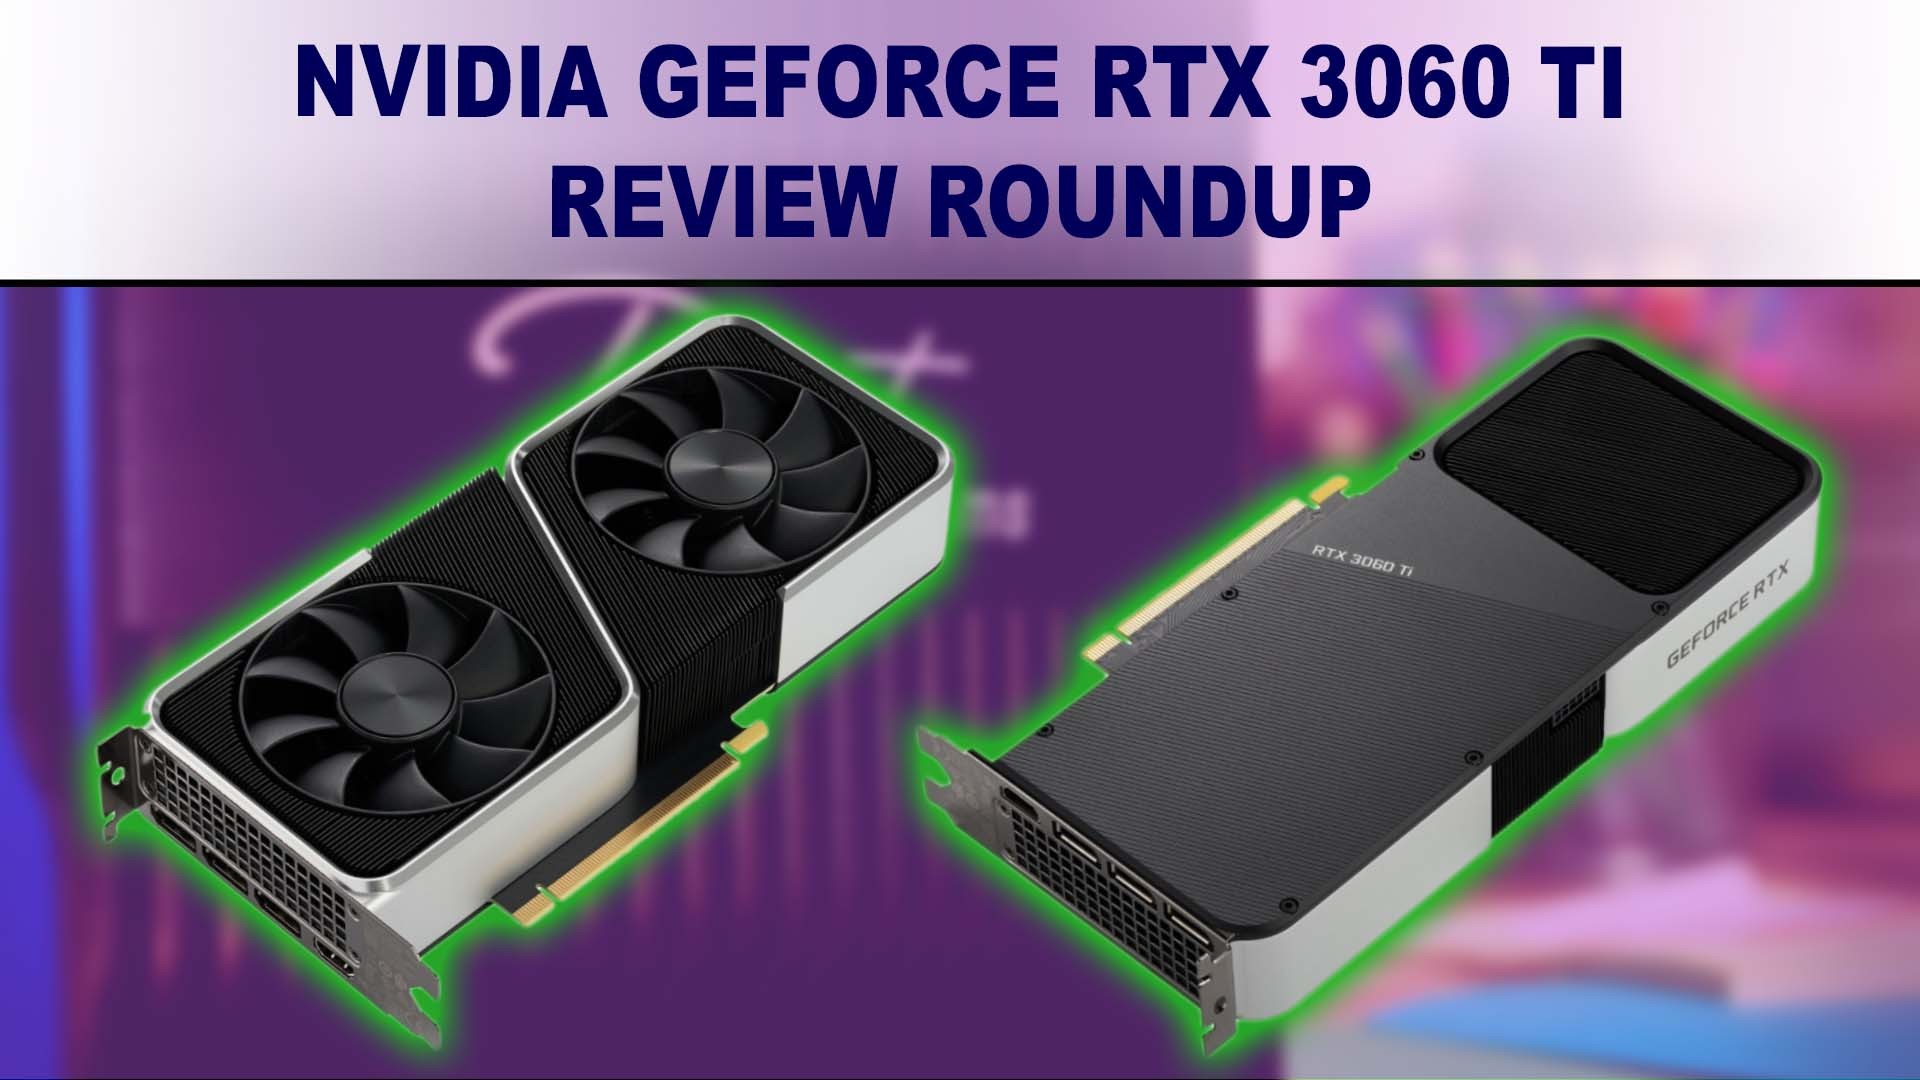 NVIDIA GeForce RTX 3060 Ti Review Roundup